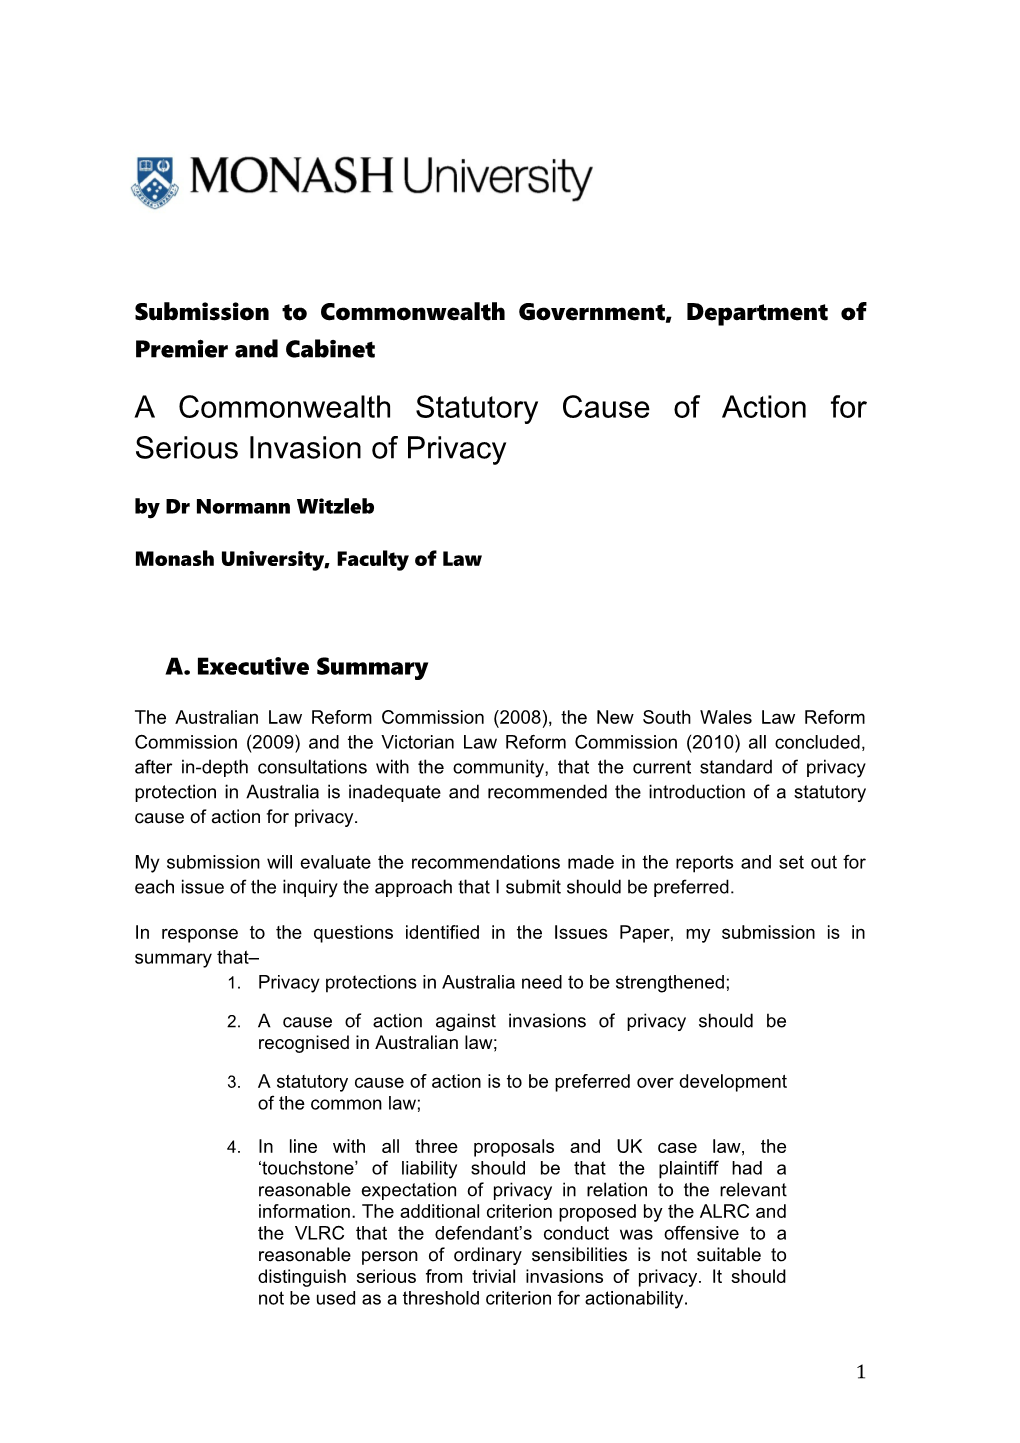 Submission to Commonwealth Government, Department of Premier and Cabinet